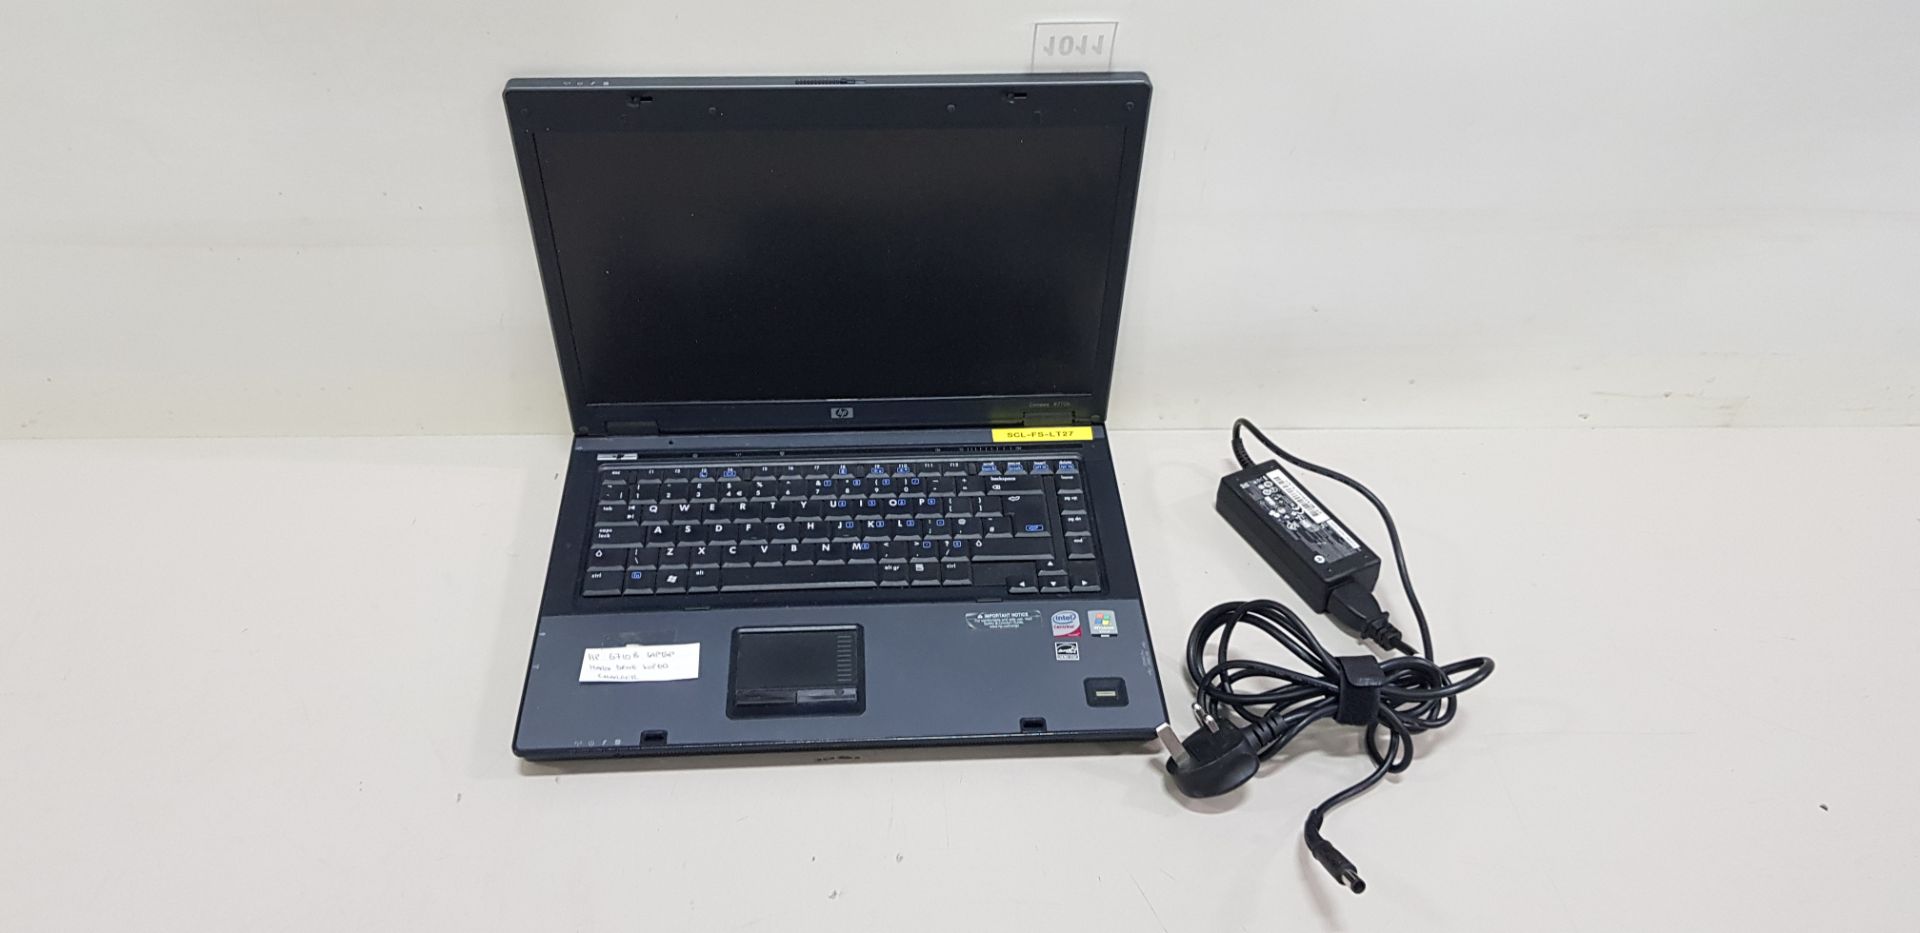 HP 6710 B WITH WINDOWS VISTA LAPTOP - HARD DRIVES WIPED - COMES WITH CHARGER